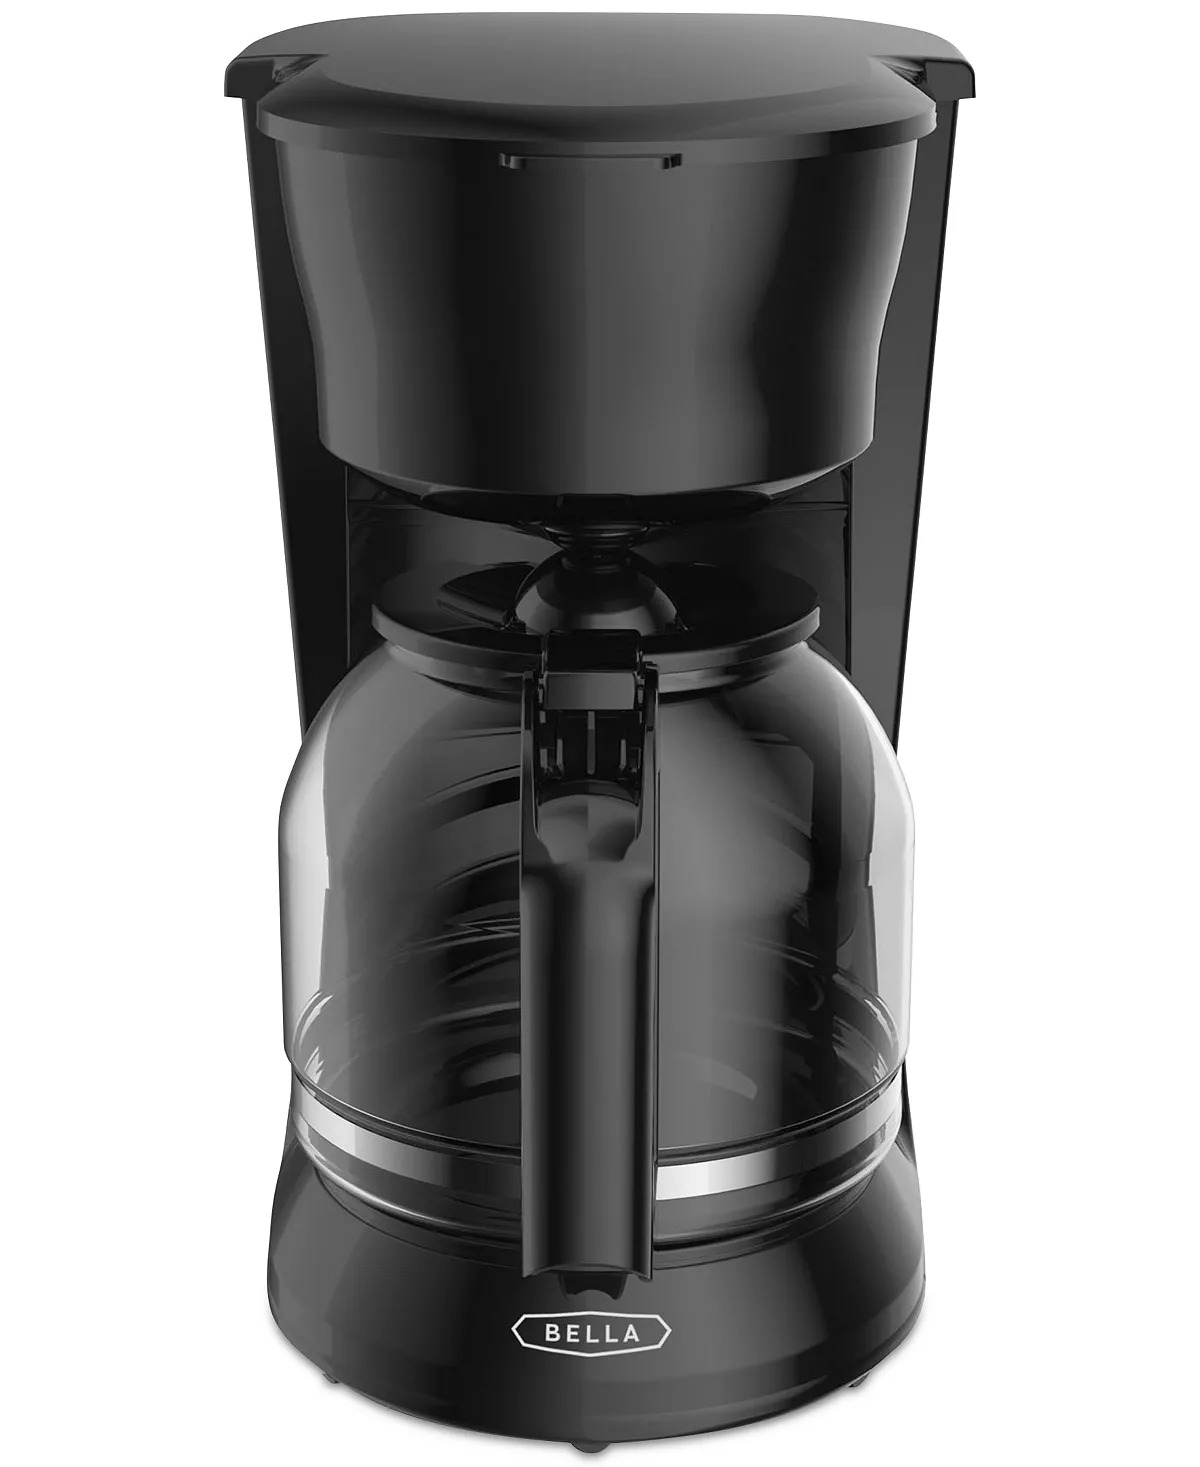 12-Cup Bella Glass-Carafe Black Drip Coffee Maker $15.93 + Free Store Pickup at Macy's or F/S on $25+